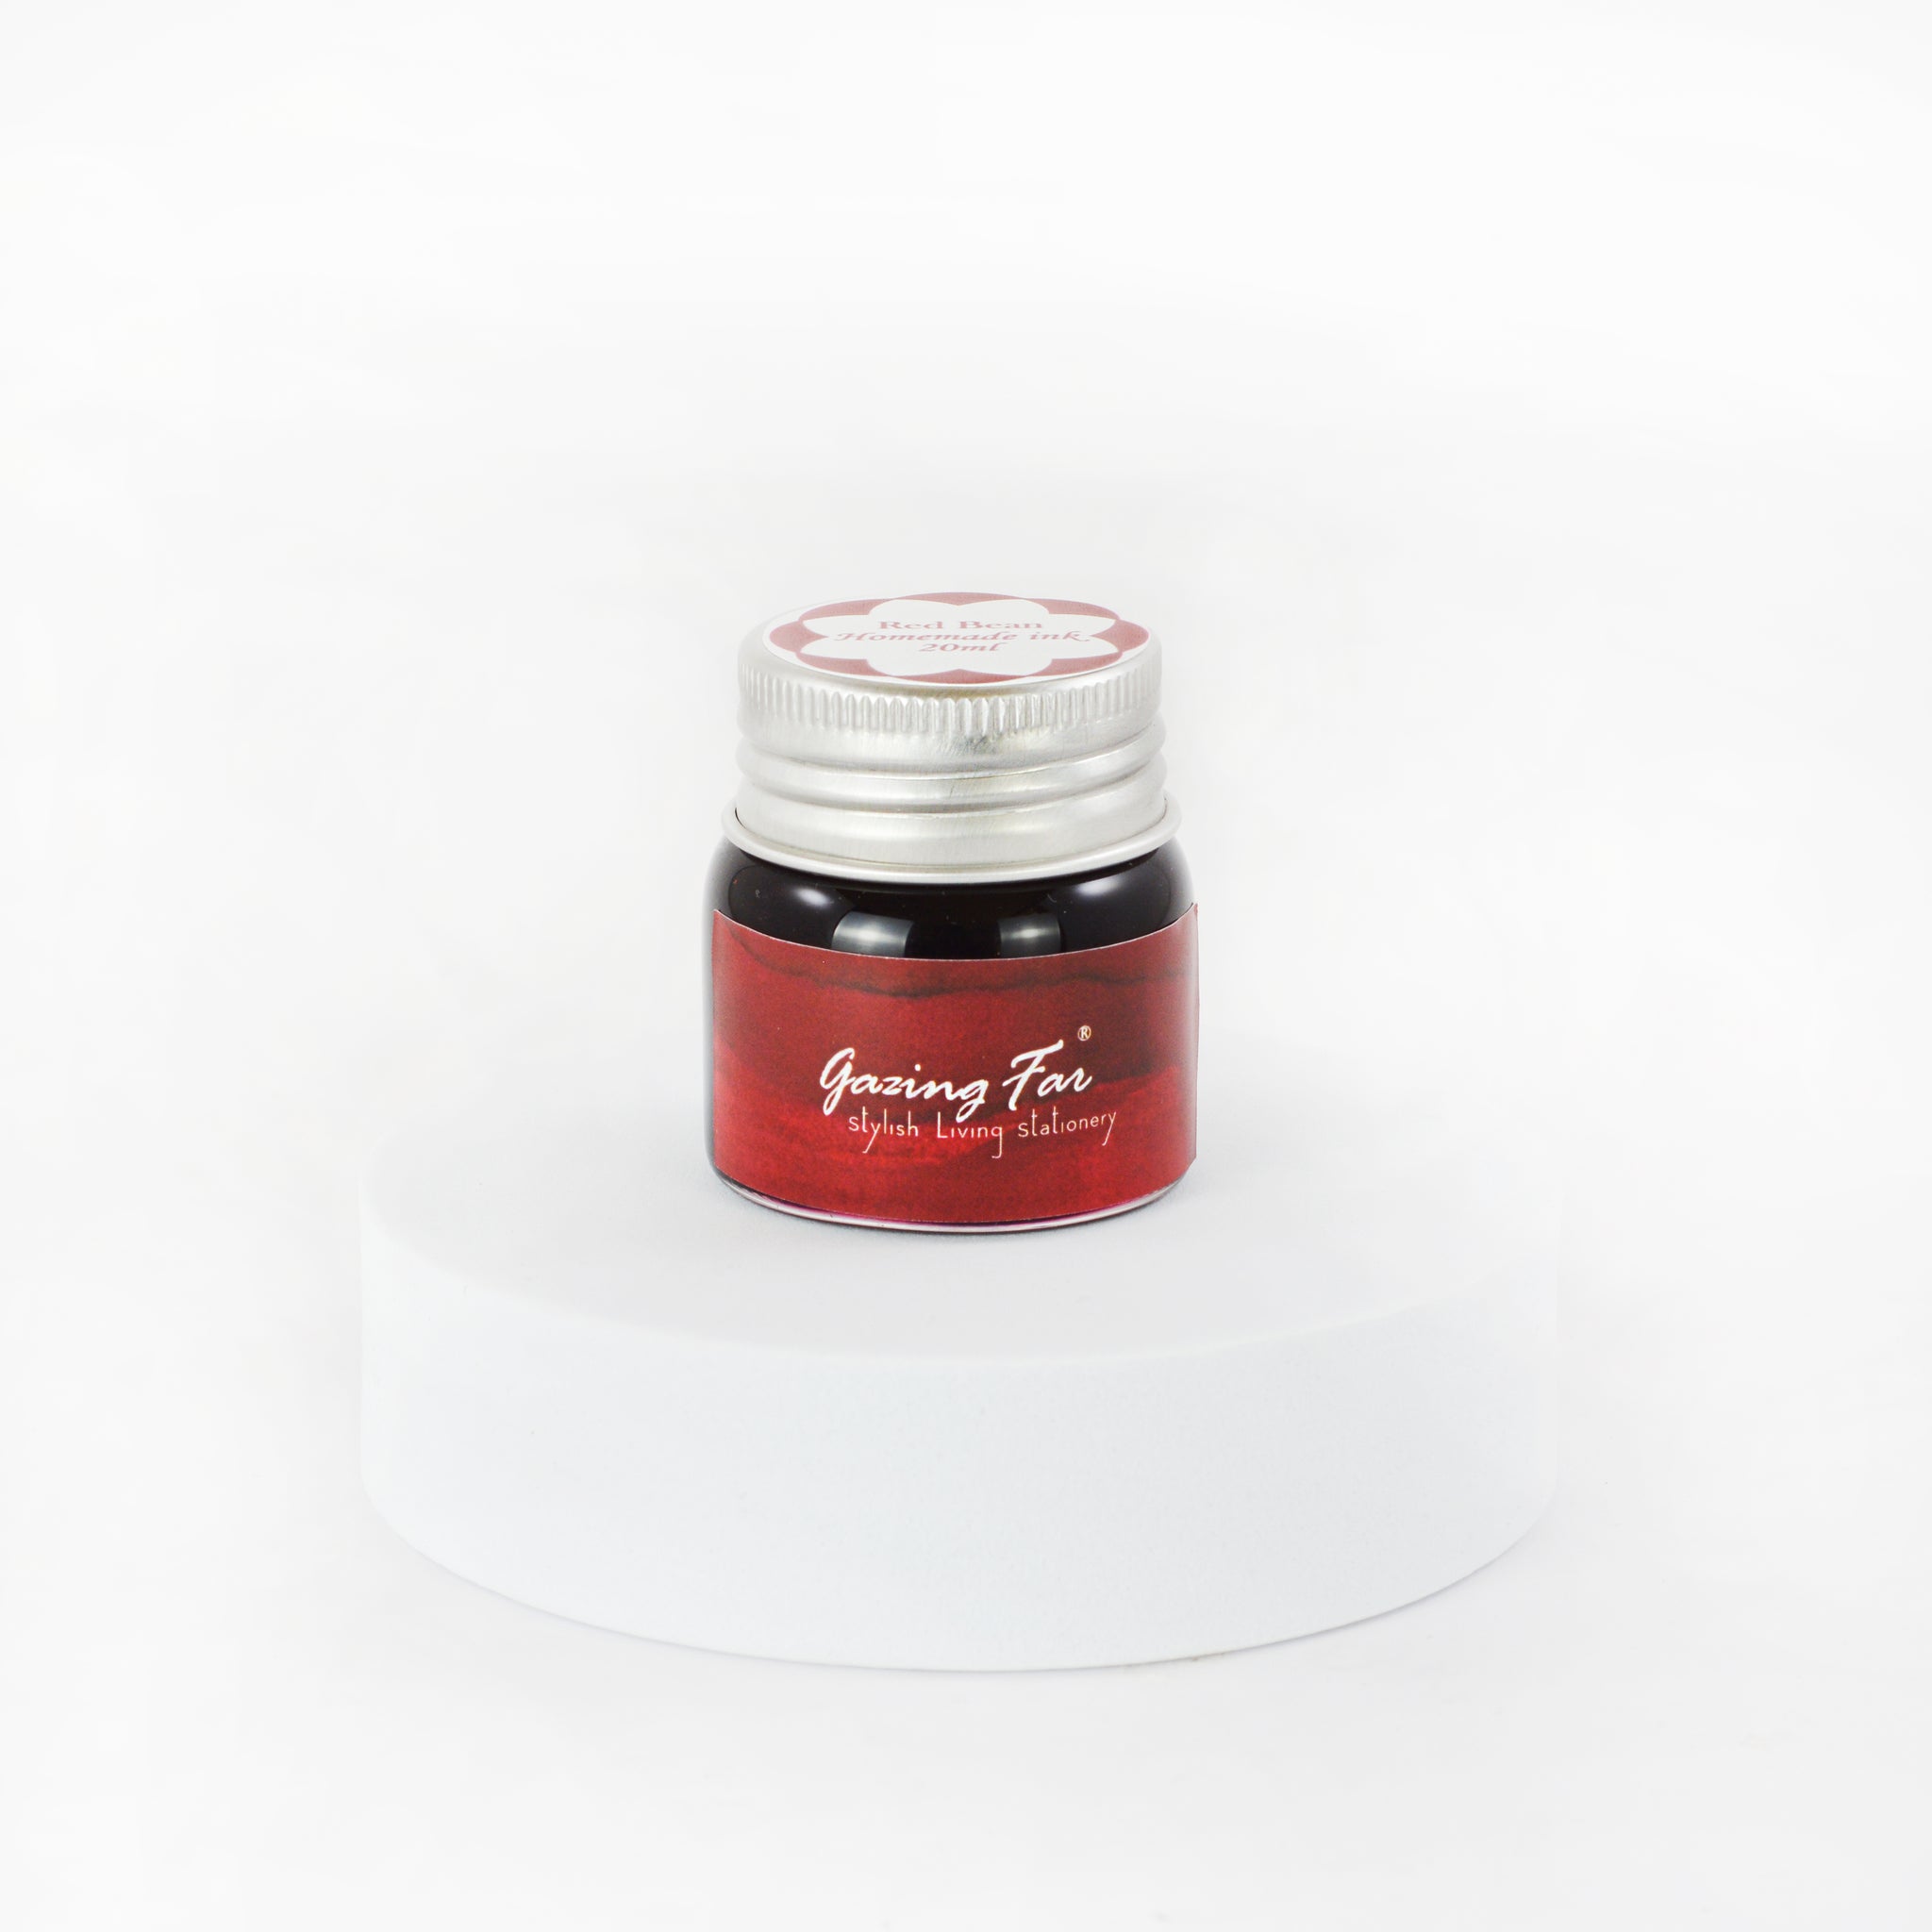 GazingFar homemade fountain pen ink- Red Bean, A color of Red and Sweet.